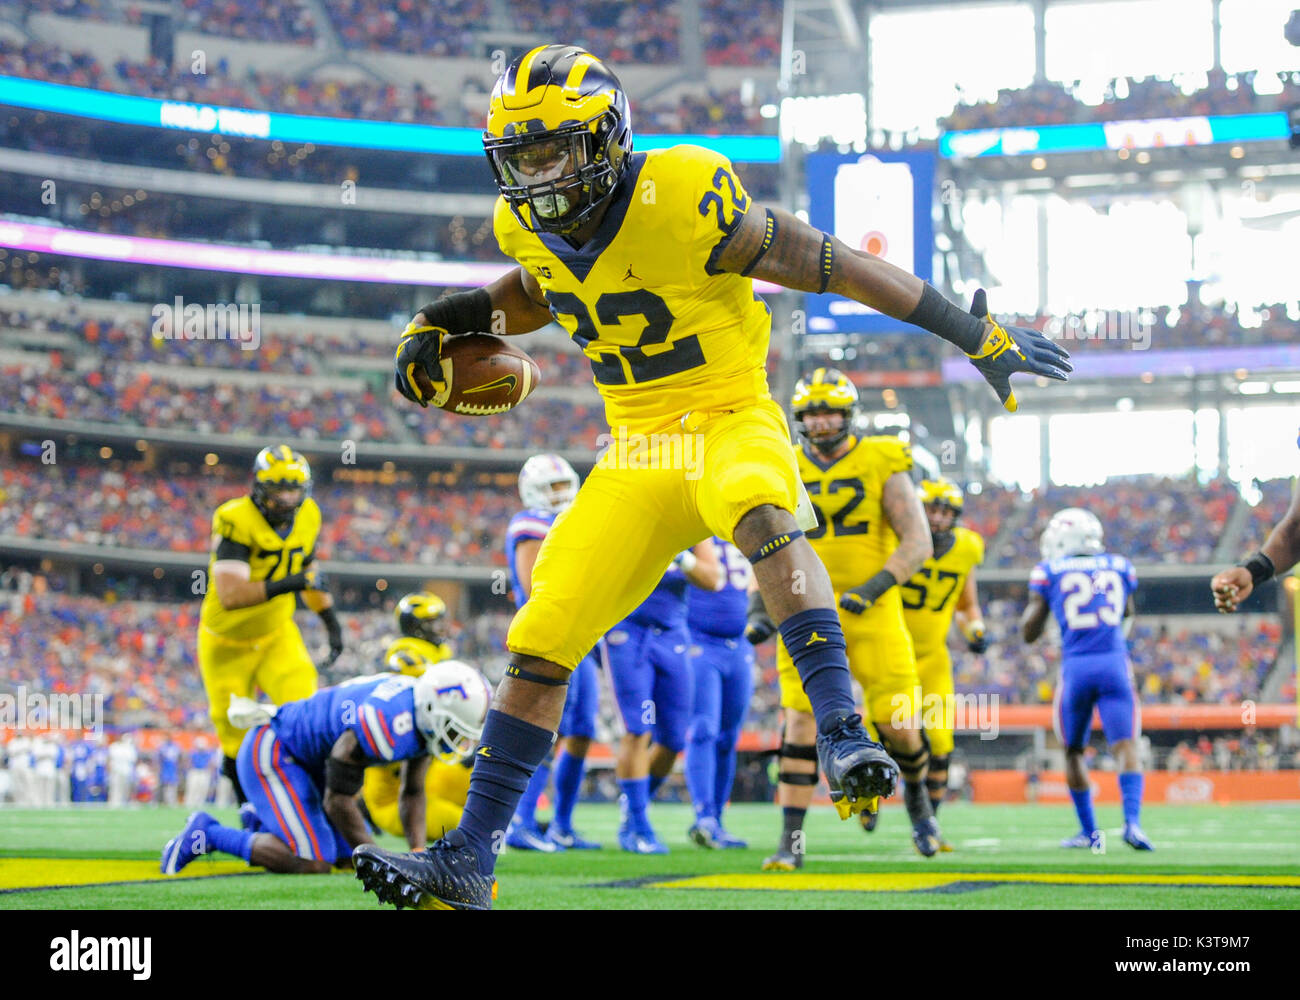 September 02, 2017: Michigan Wolverines running back Karan Higdon #22 carries the ball for a touchdown during the Advocare Classic NCAA Football game between the University of Michigan Wolverines and the University of Florida Gators at AT&T Stadium in Arlington, TX Michigan defeated Florida 33-17 Albert Pena/CSM Stock Photo